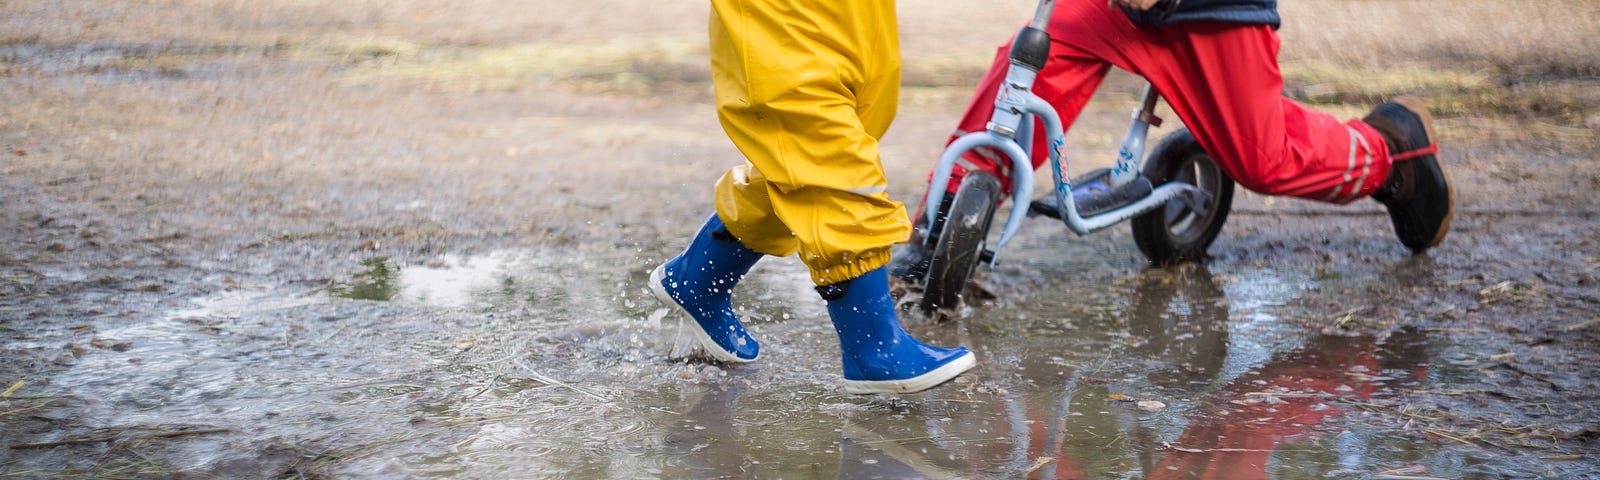 Two children, one jumping in a puddle and one riding a bike through the puddle.